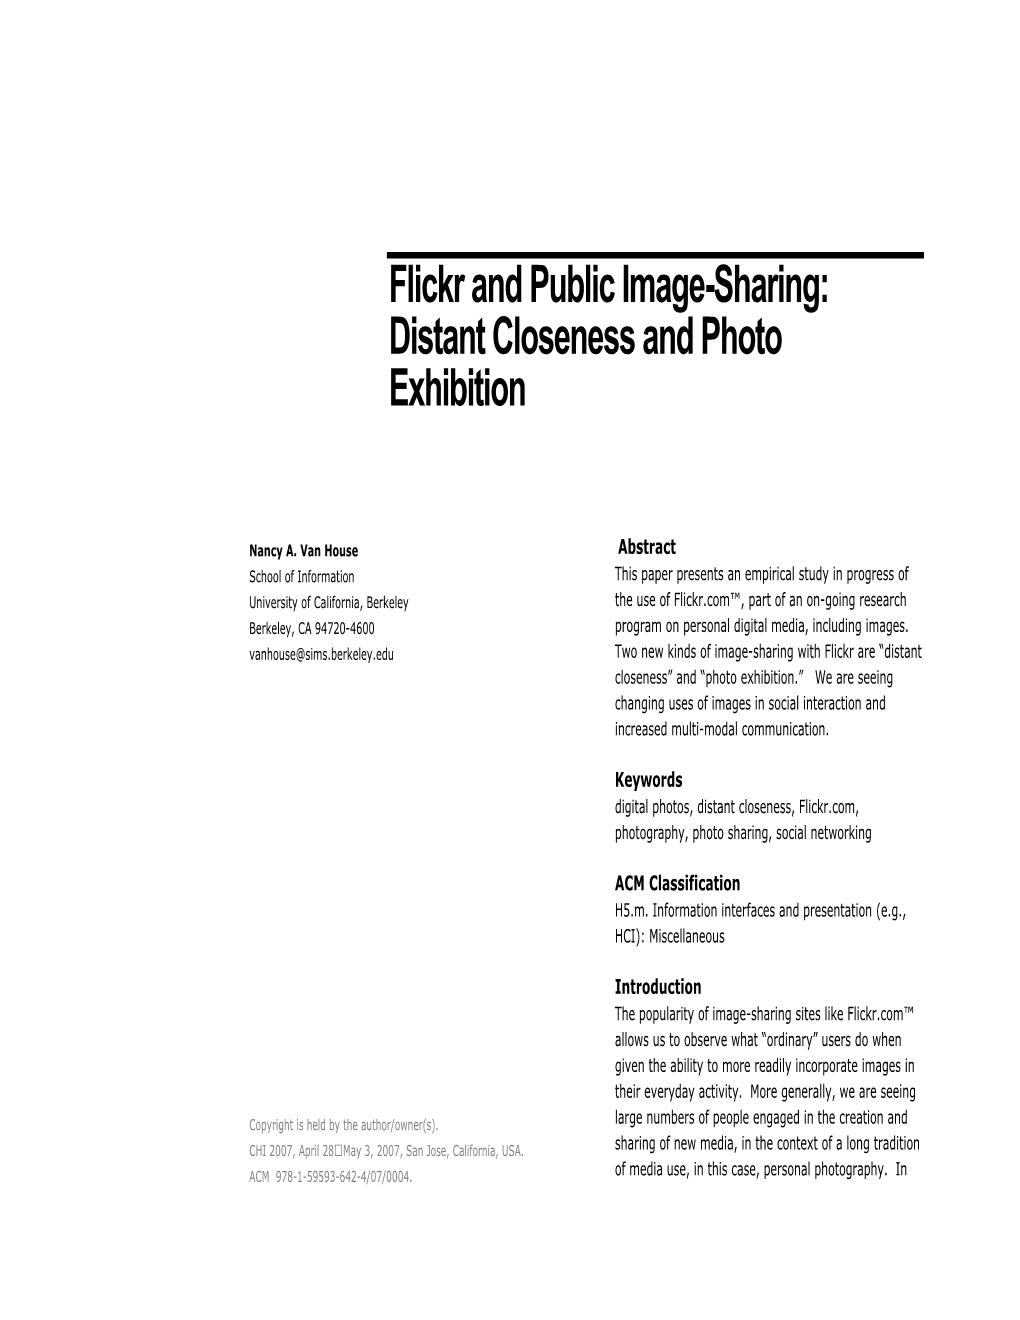 Flickr and Public Image-Sharing: Distant Closeness and Photo Exhibition